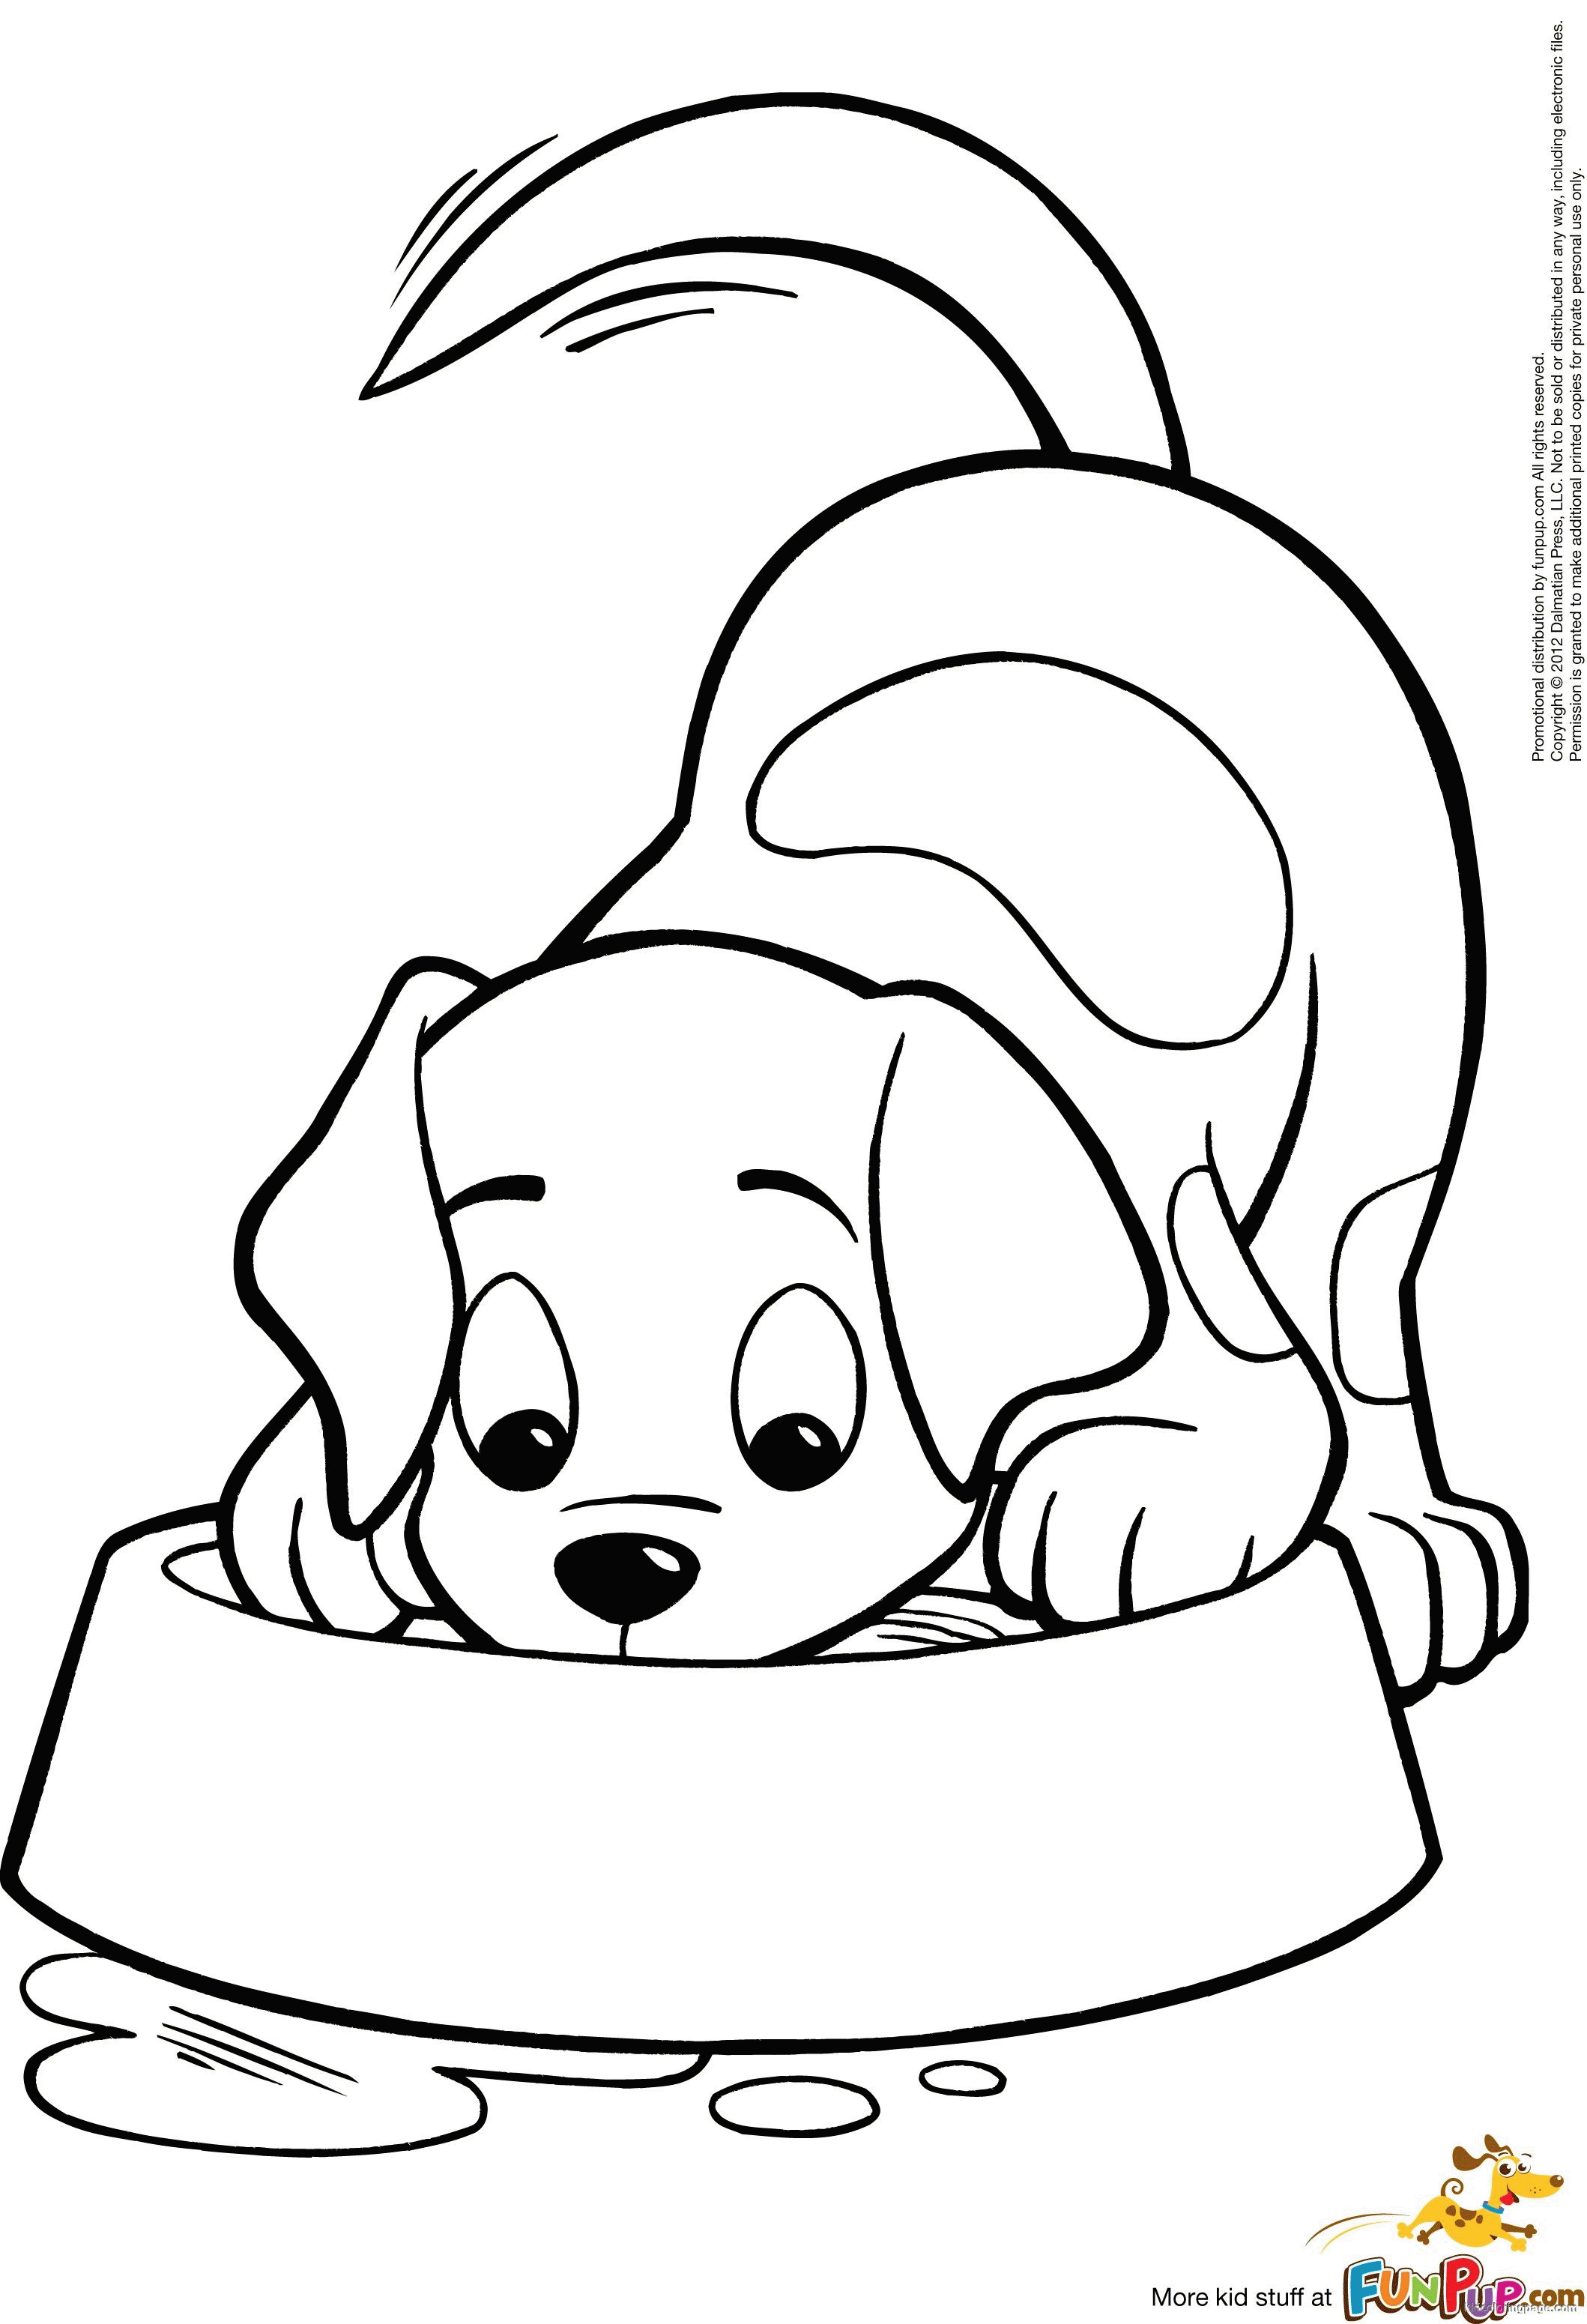 Golden Retriever Puppy Coloring Pages Printable - Coloring Home